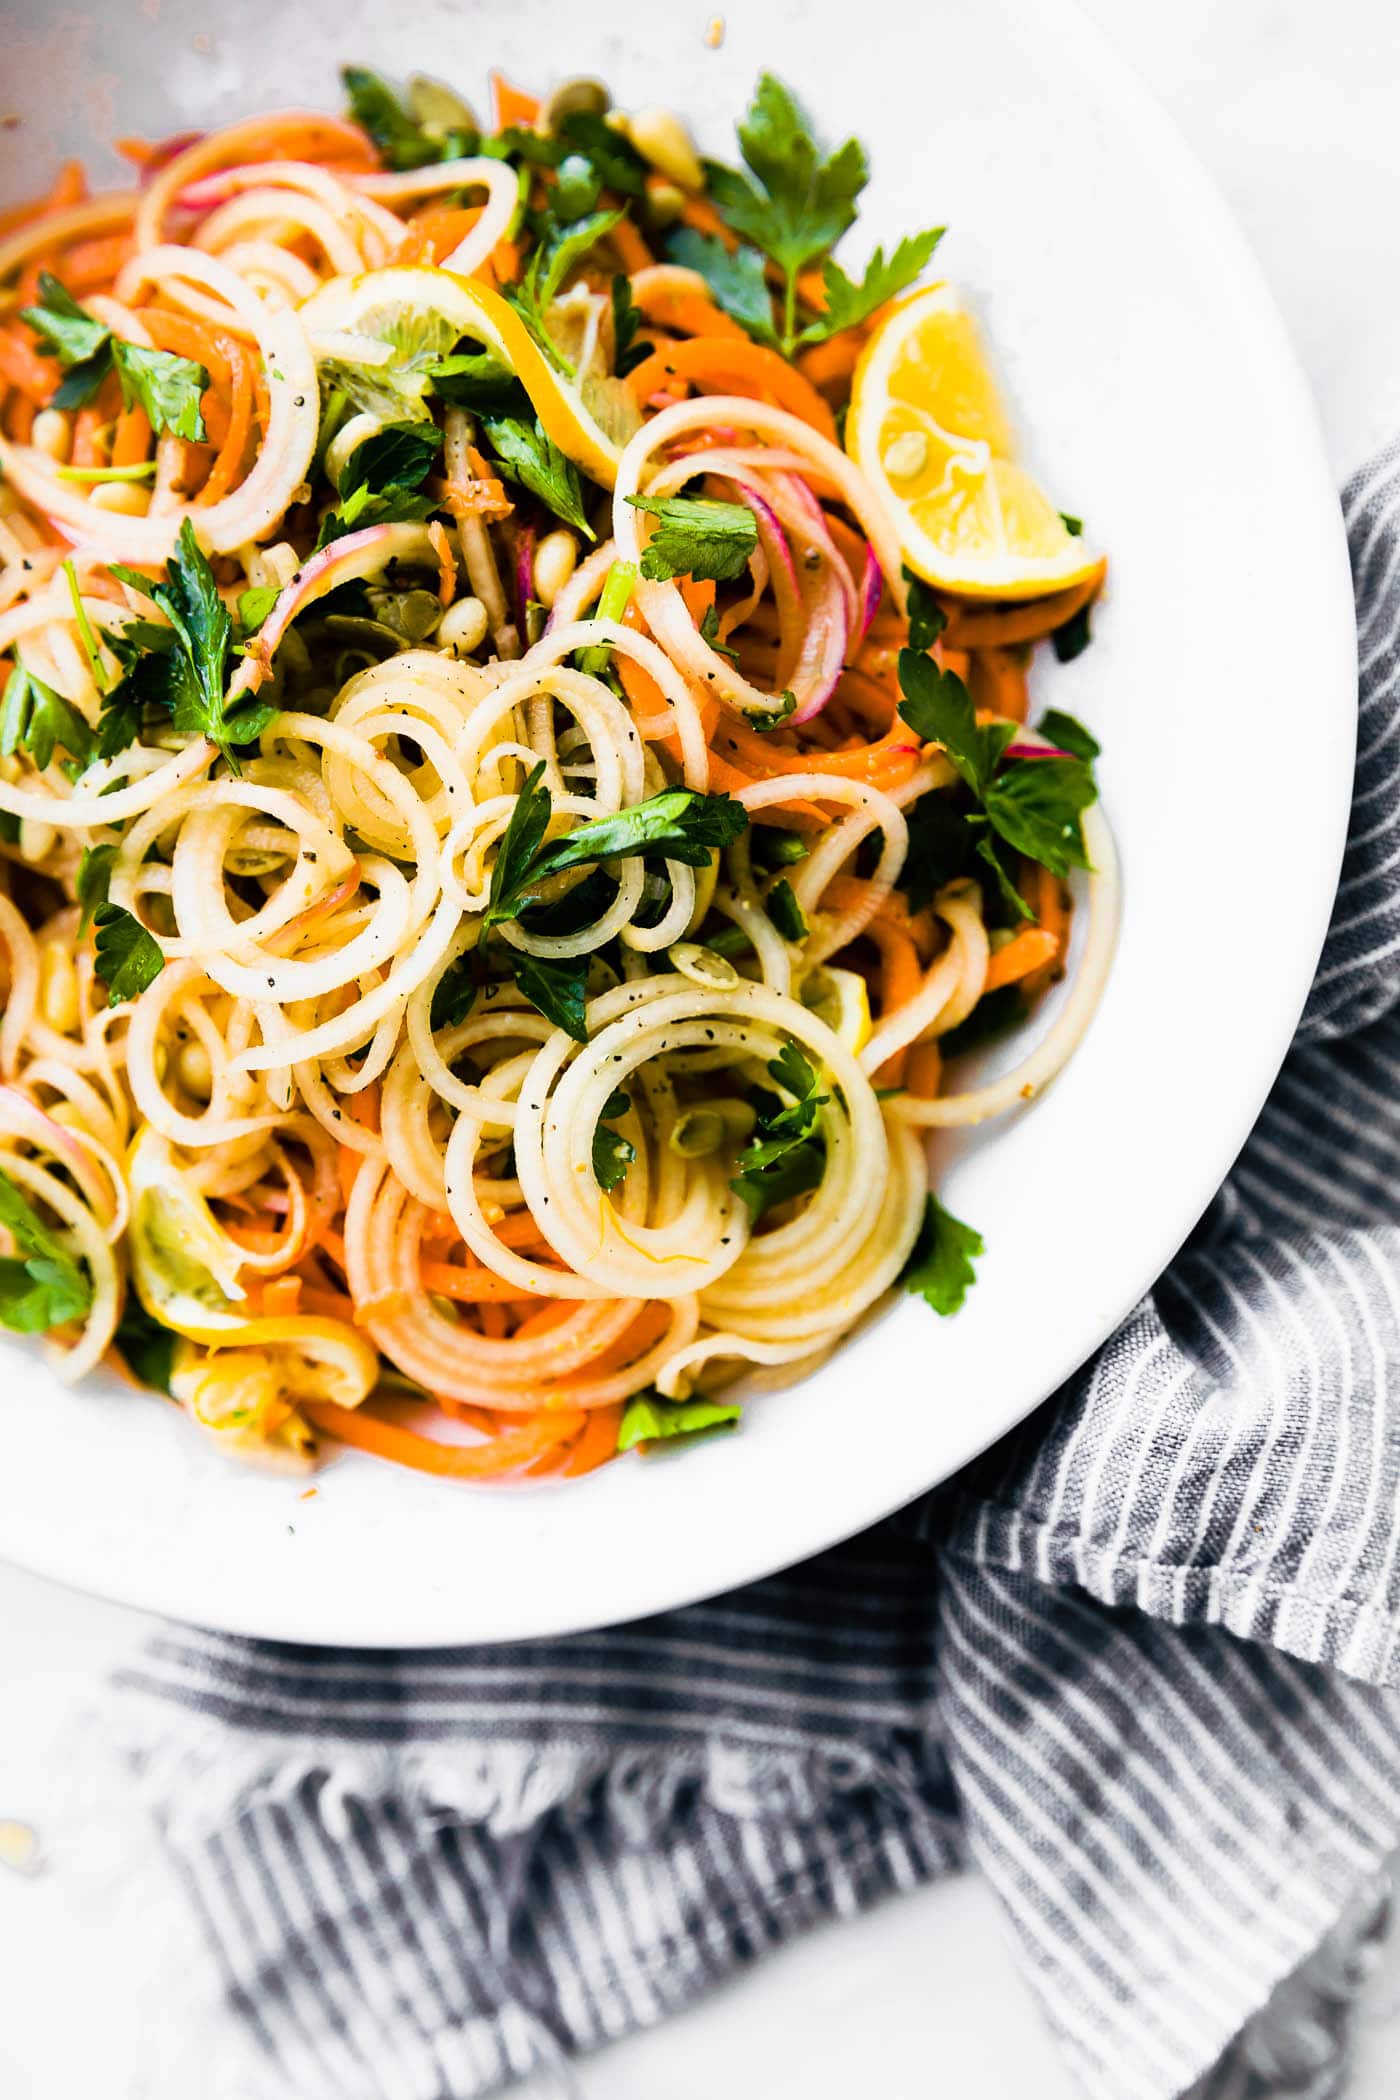 Light and Zesty Carrot Celeriac Spiralized Salad! This marinated vegetable spiralized salad is simple and healthy to make, not to mention delicious! A paleo, vegan, and whole 30 friendly veggie noodle salad option you can make under 30 minutes. #vegan #paleo #whole30 #salad